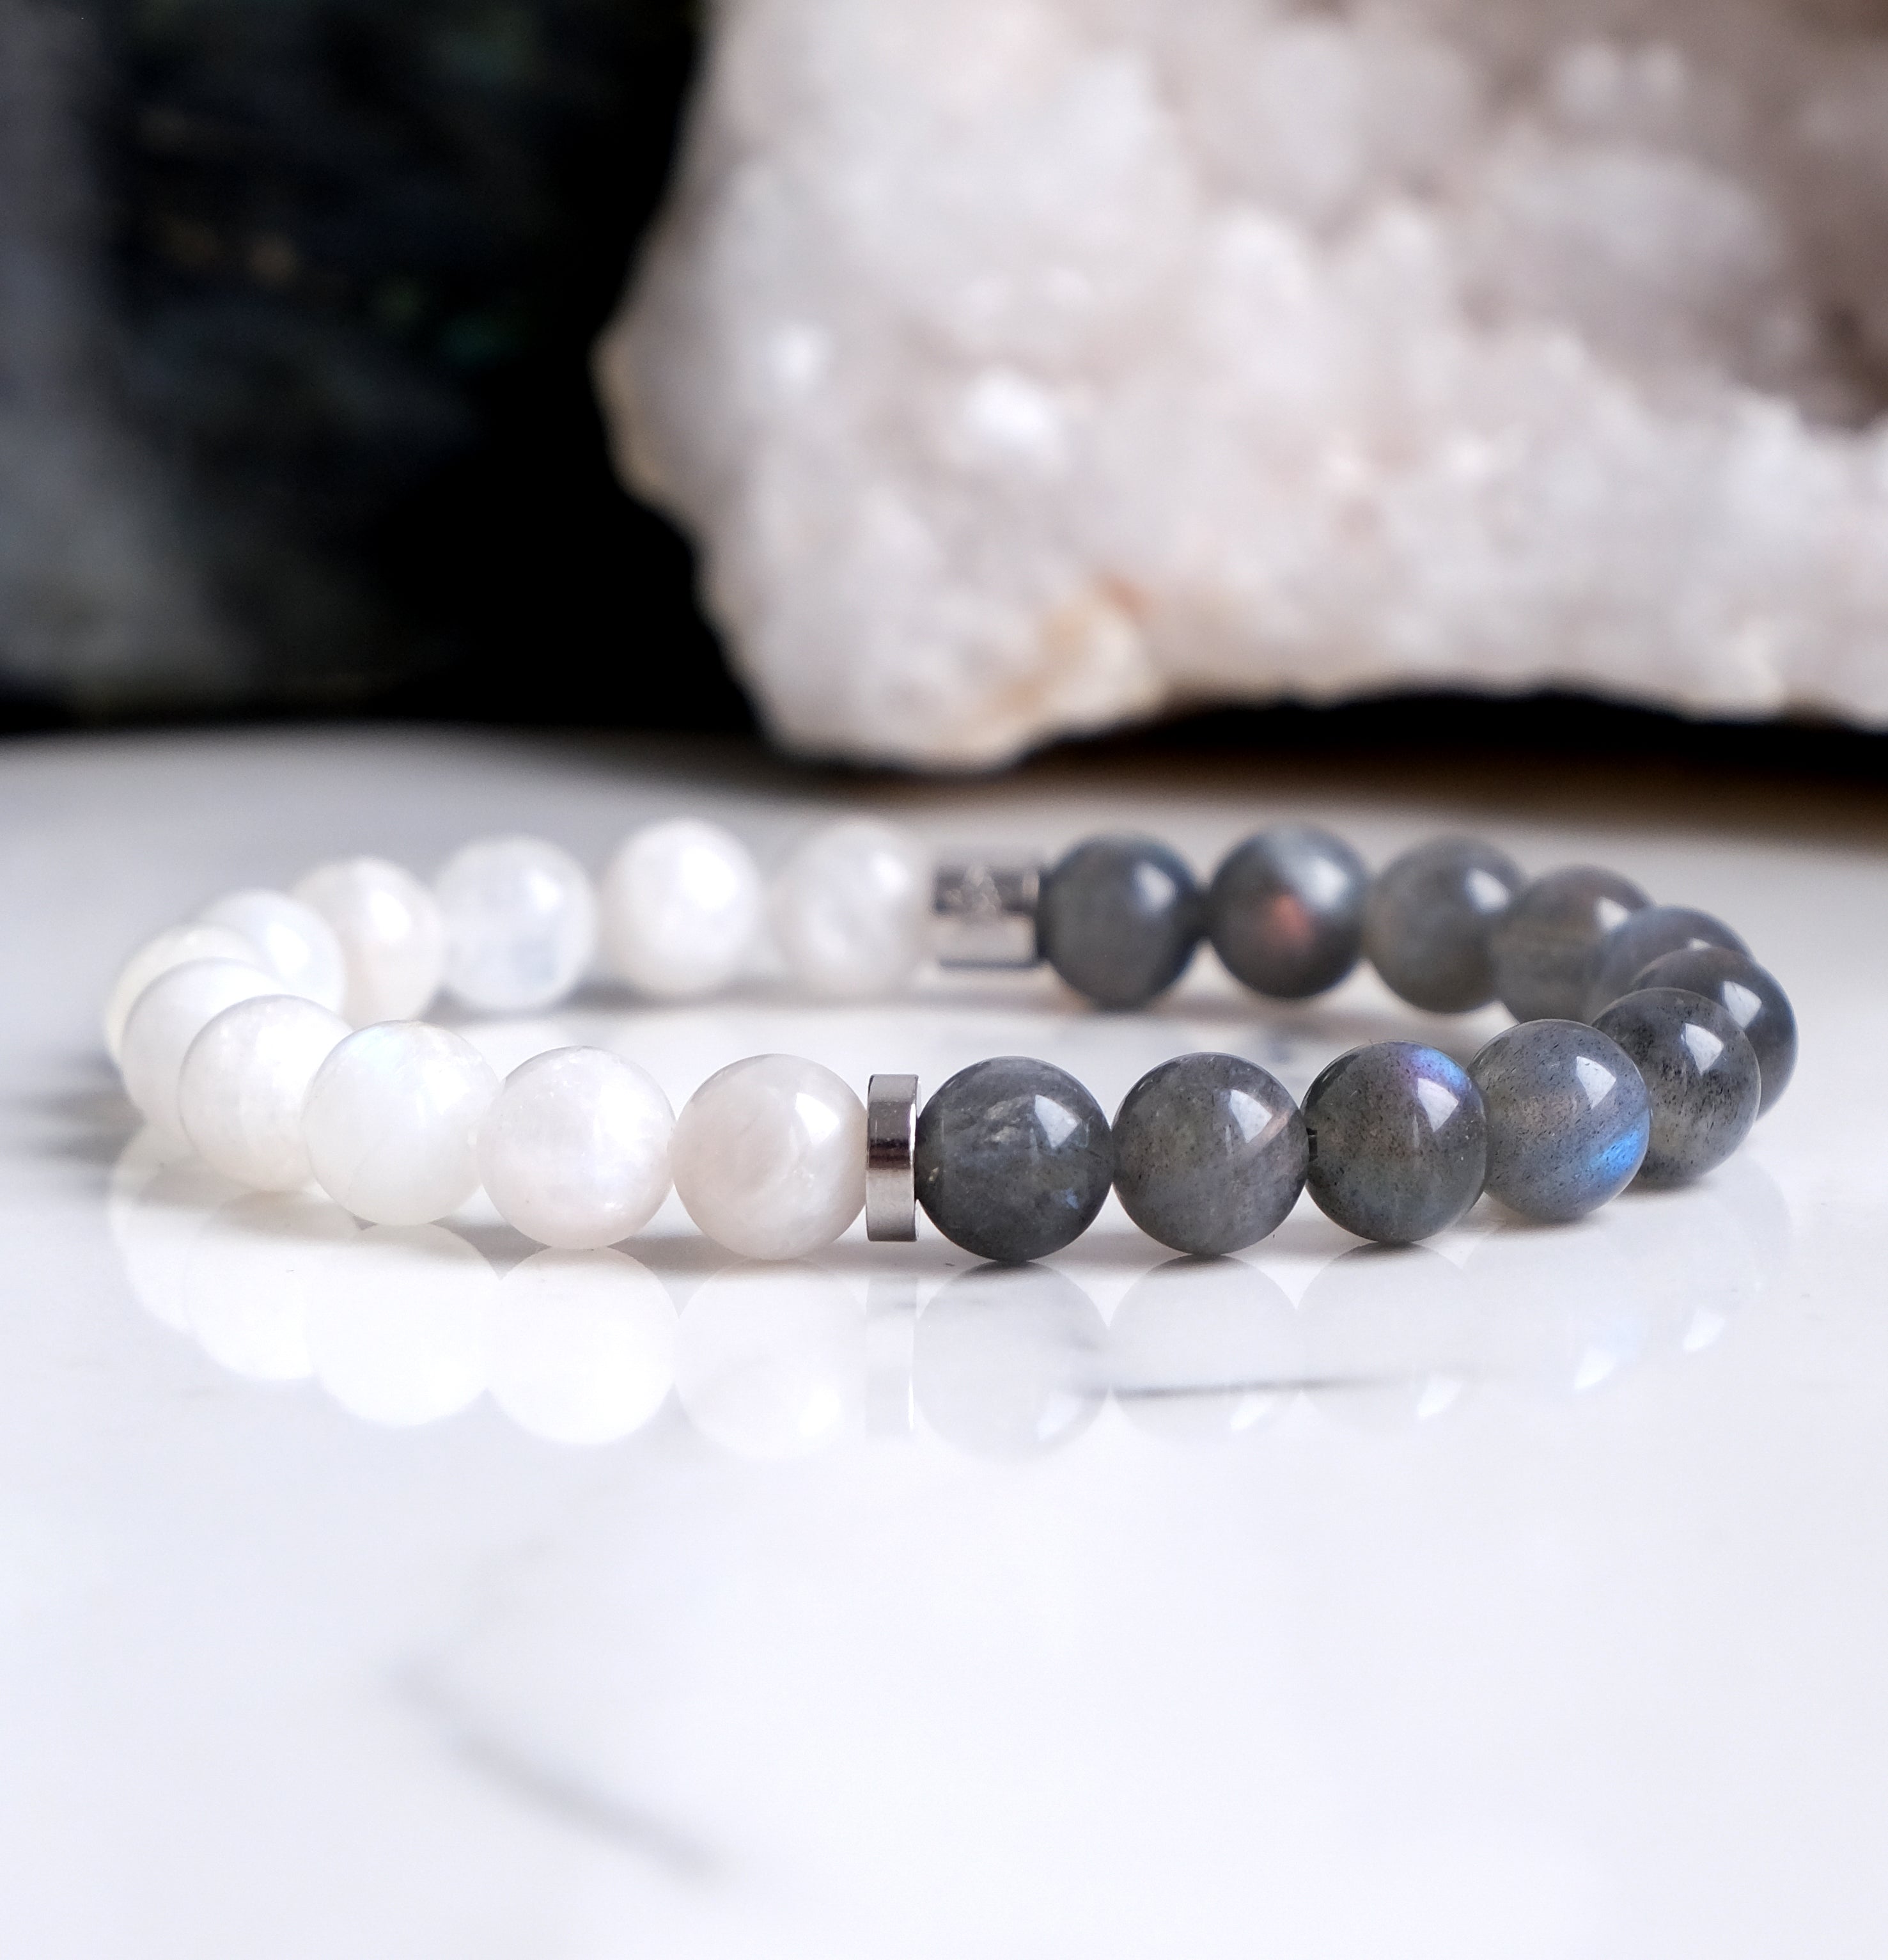 Labradorite and moonstone gemstone bracelet with stainless steel accessories